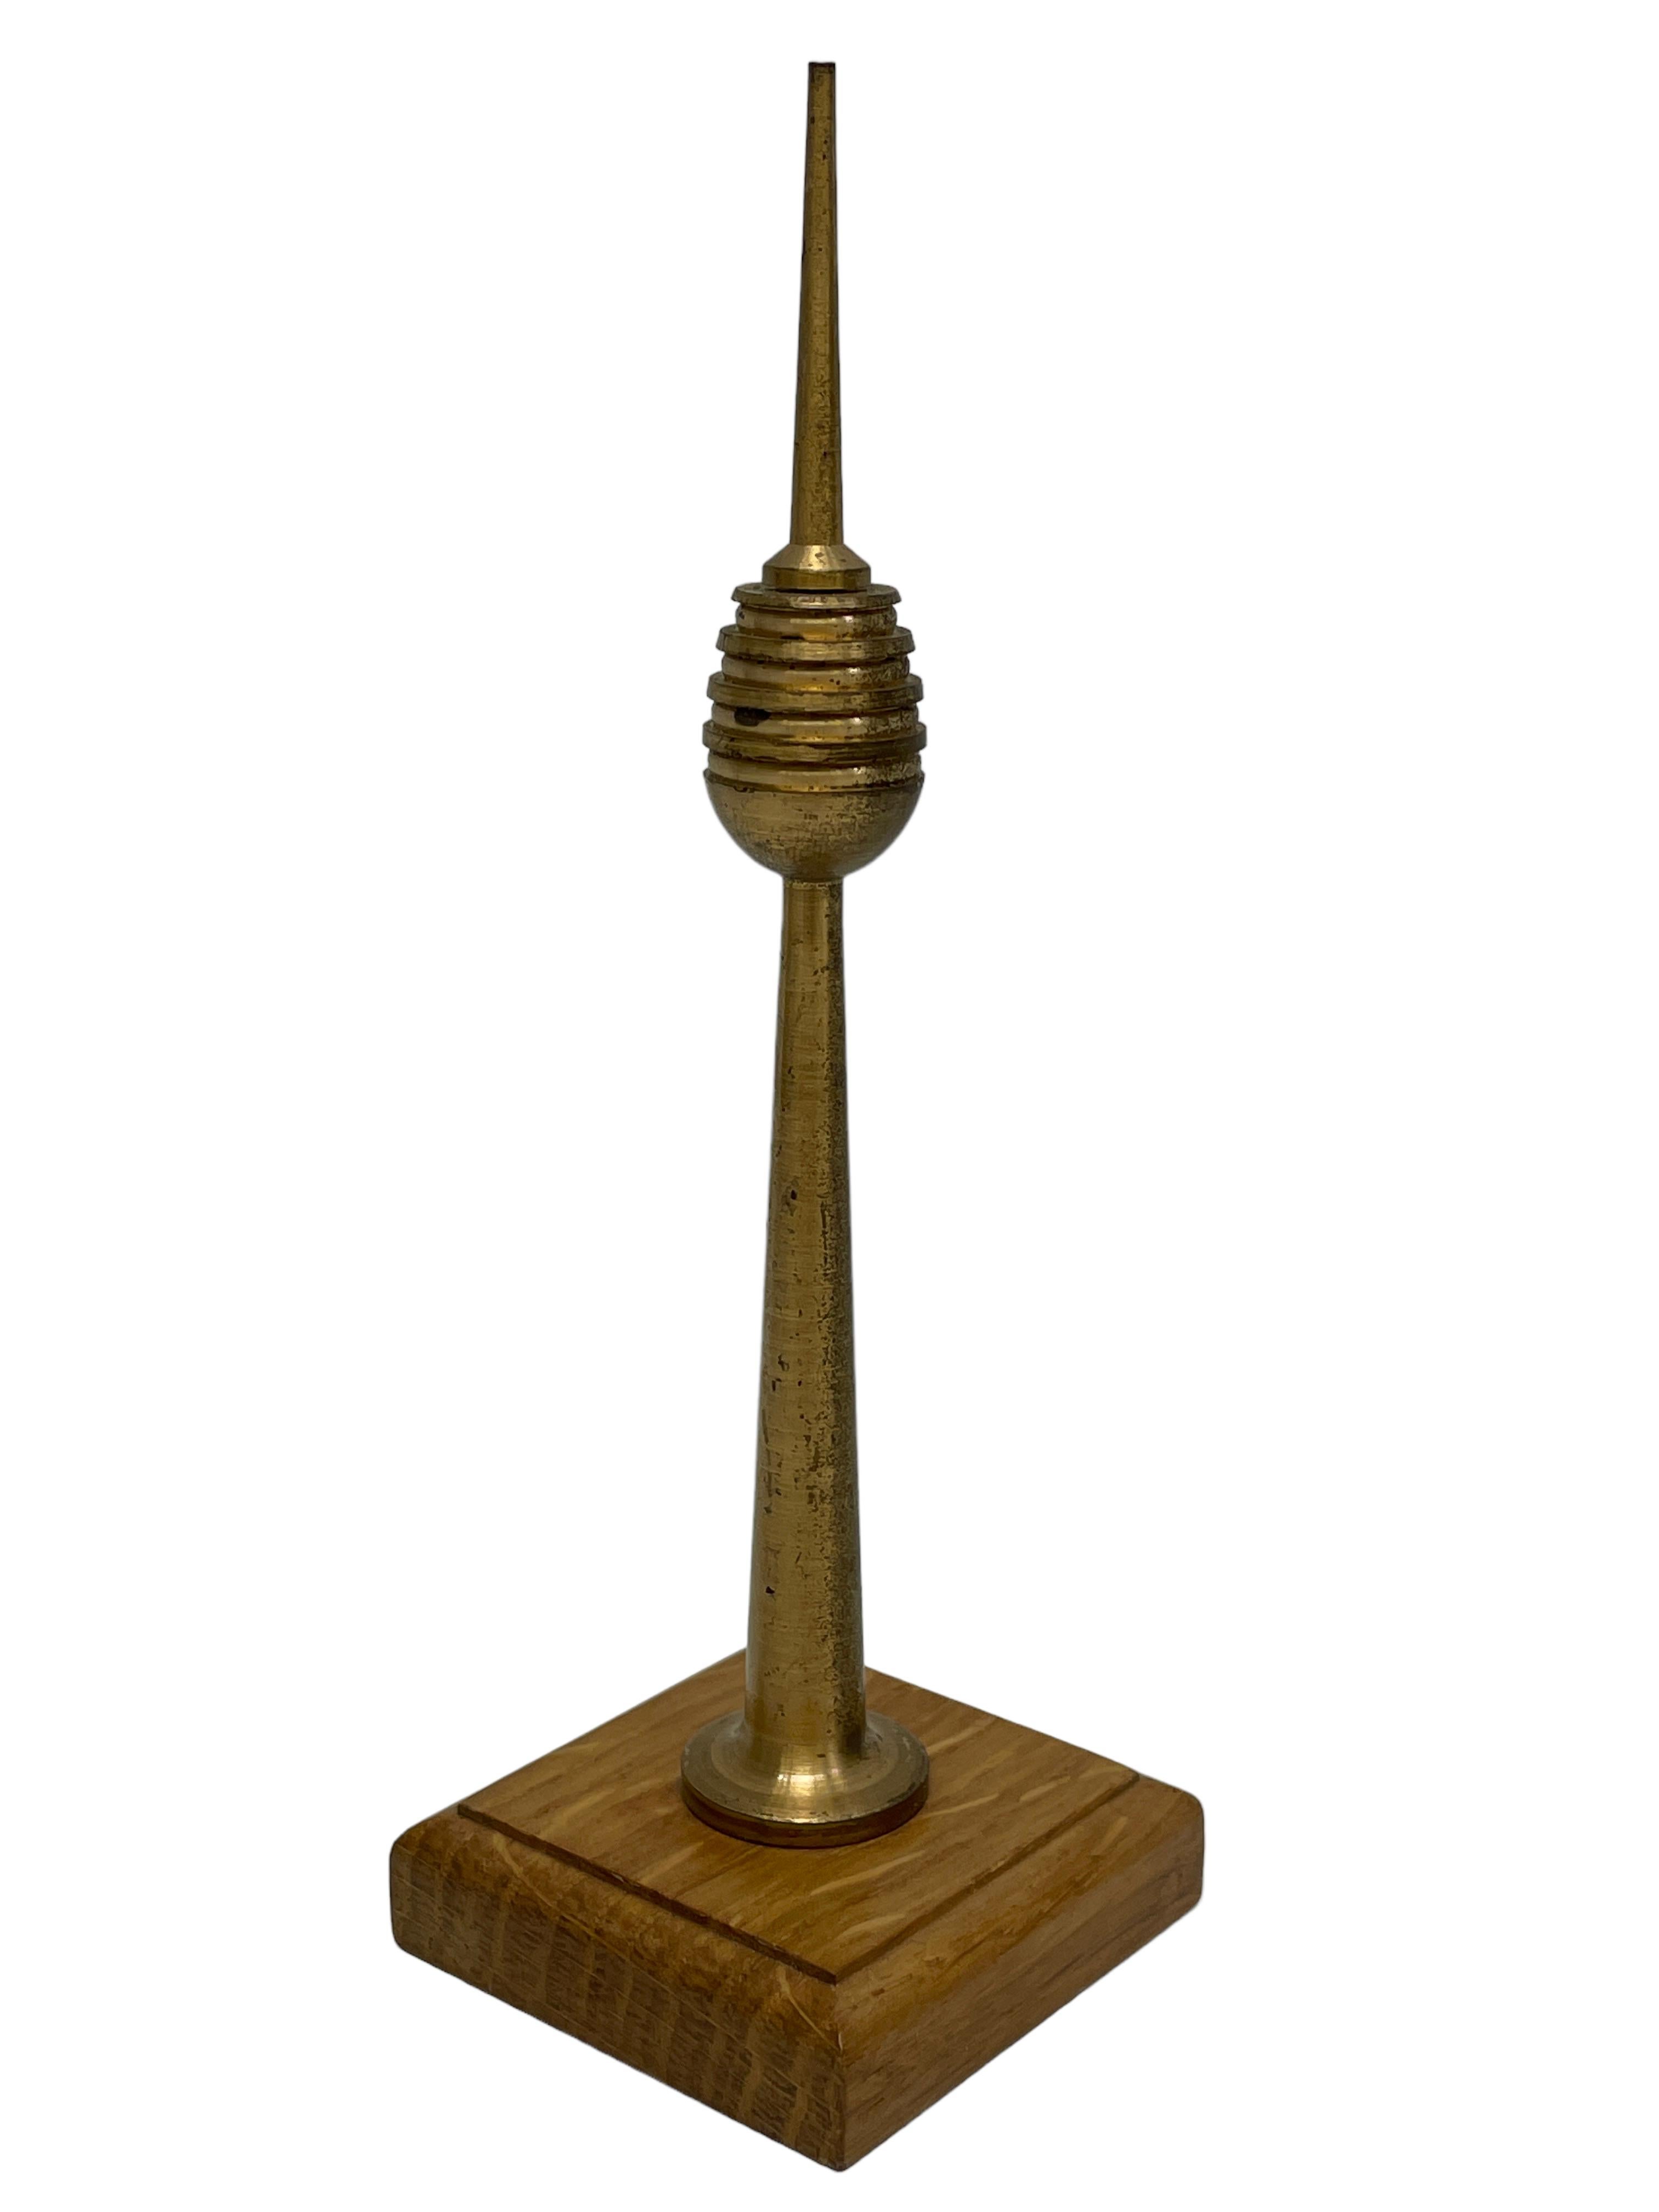 Hand-Crafted Brass Nuremberg Tv Television Tower Scale Design Model, 1980s, German For Sale